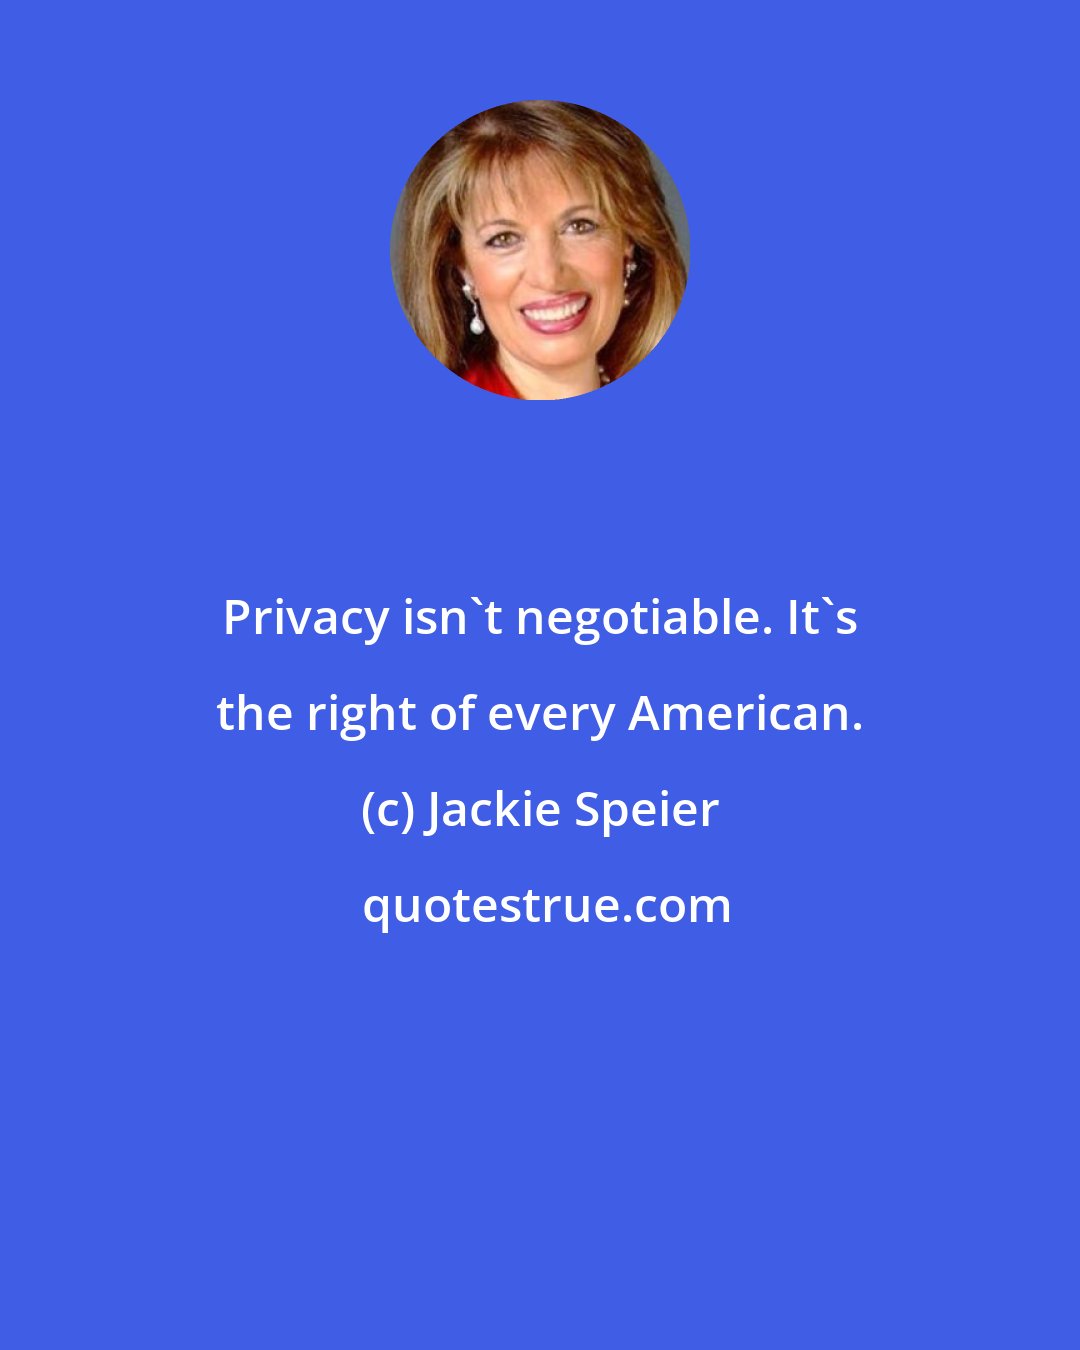 Jackie Speier: Privacy isn't negotiable. It's the right of every American.